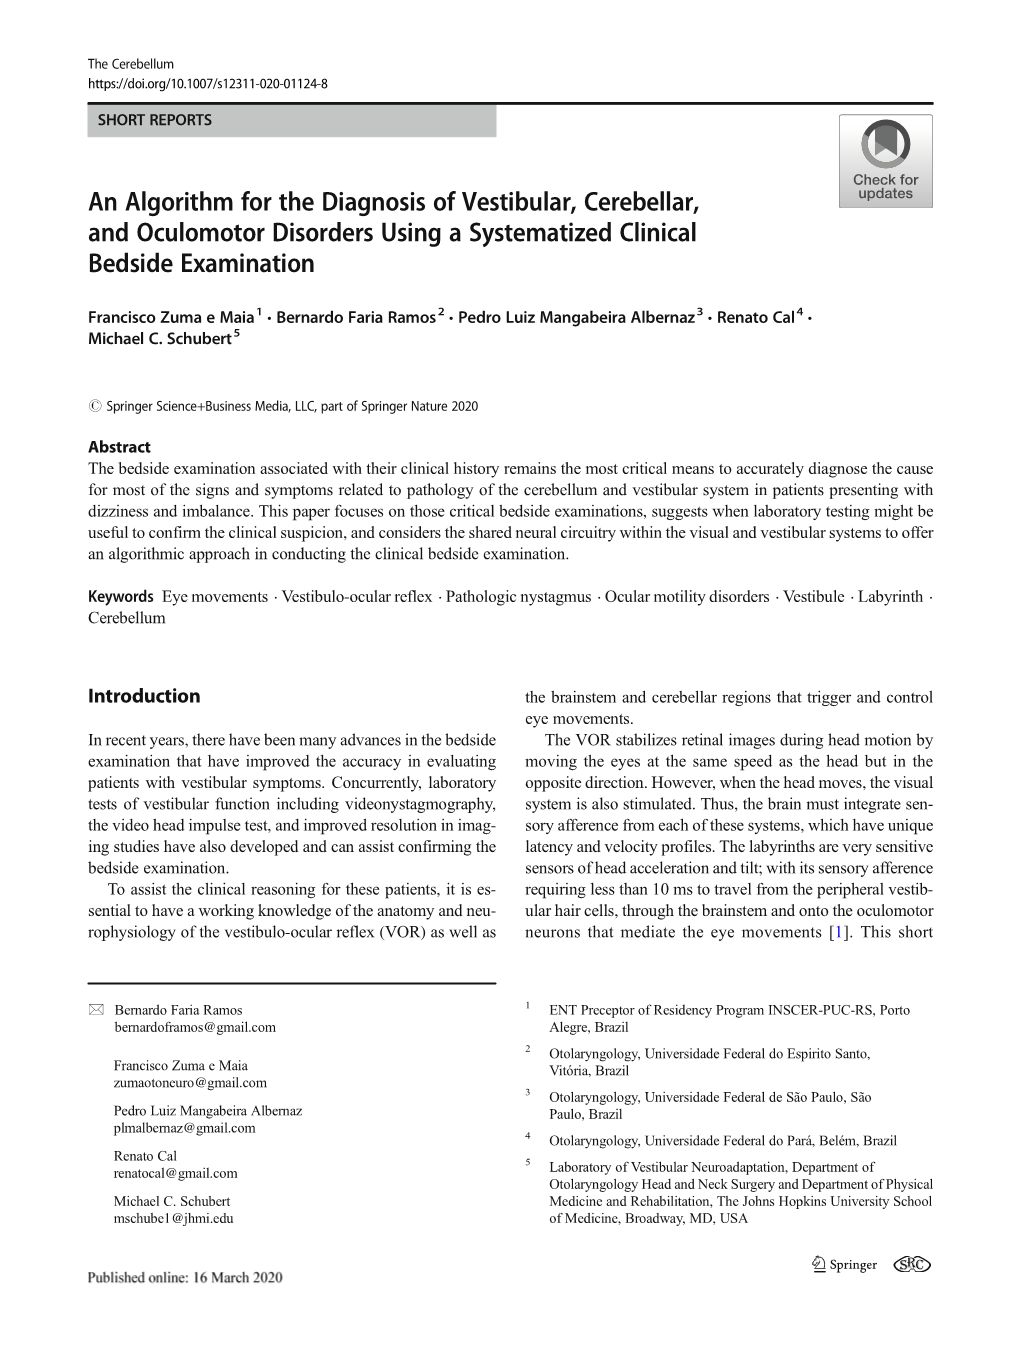 An Algorithm for the Diagnosis of Vestibular, Cerebellar, and Oculomotor Disorders Using a Systematized Clinical Bedside Examination